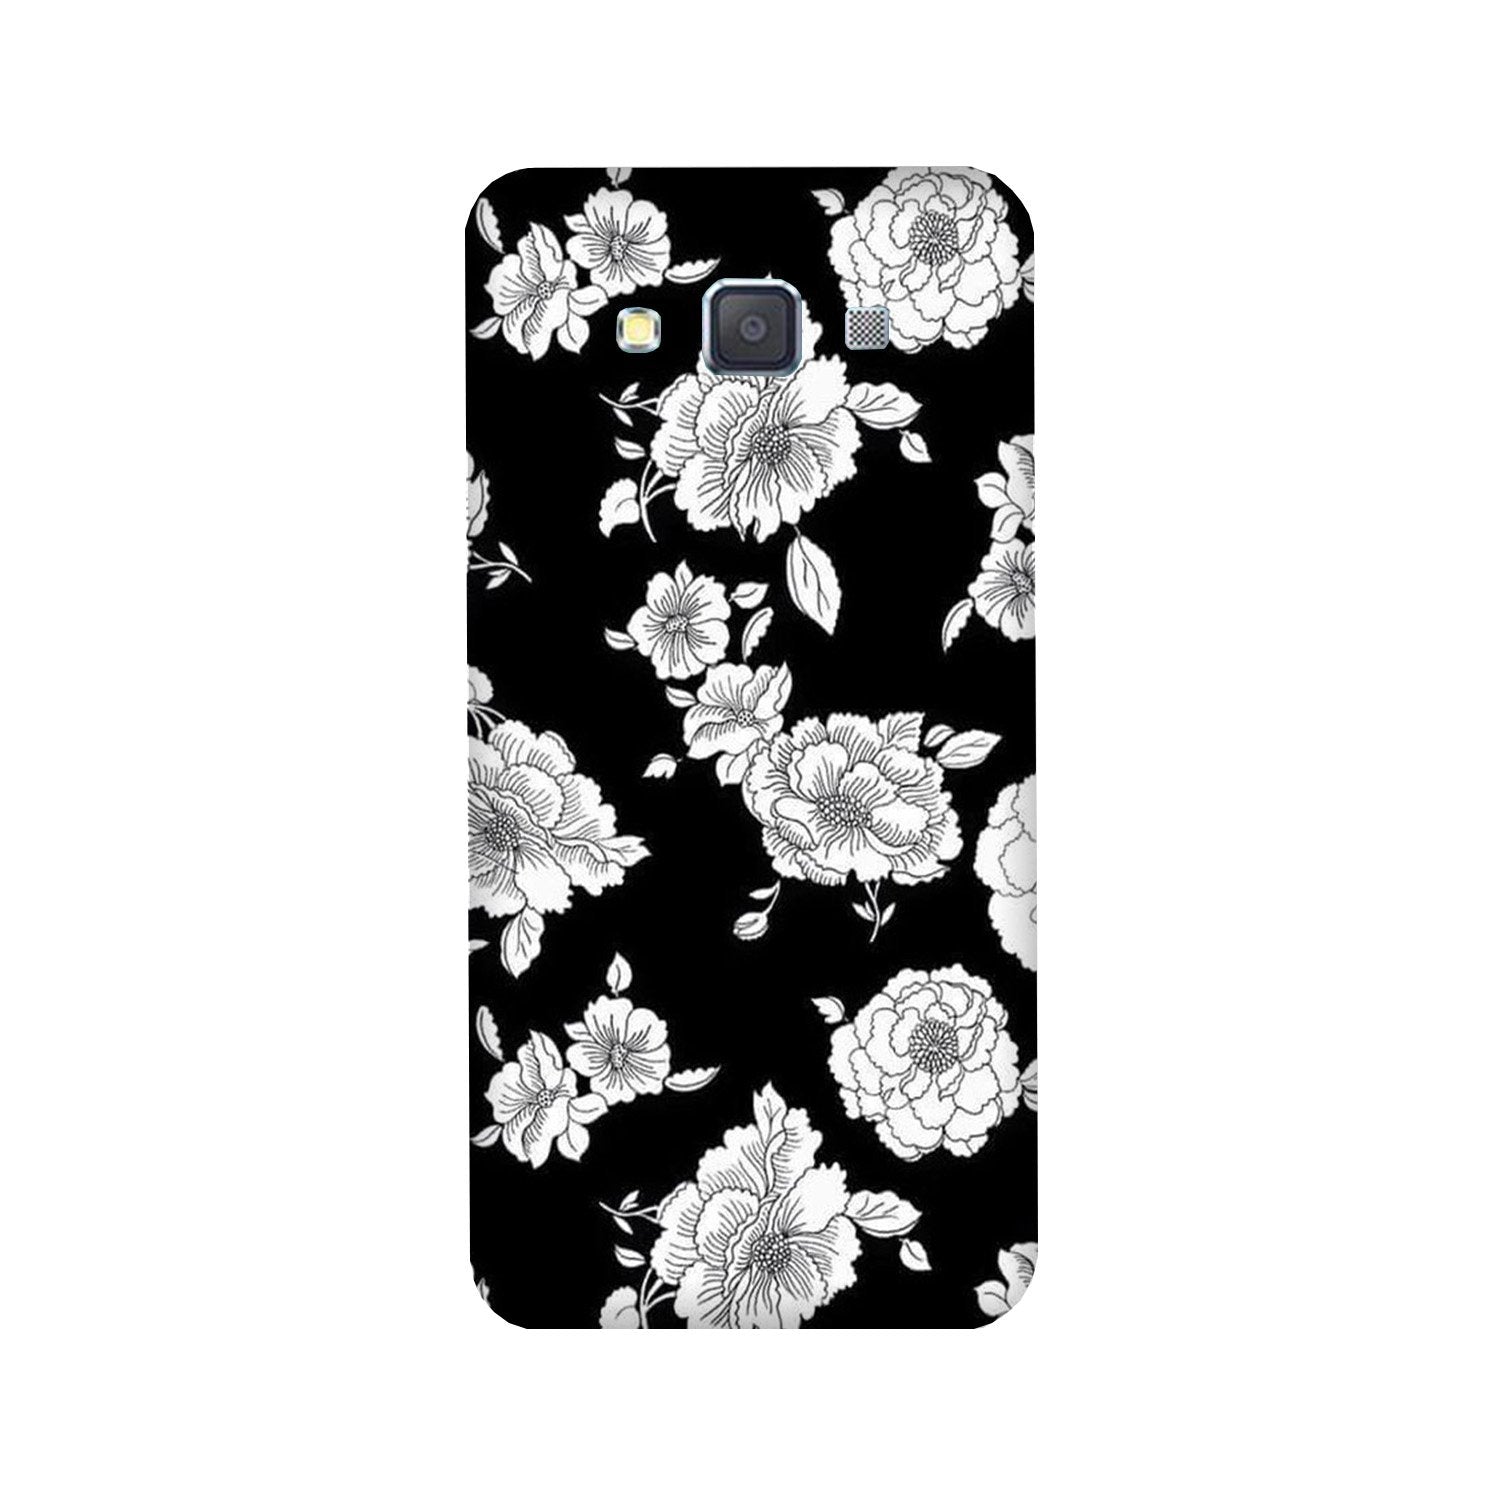 White flowers Black Background Case for Galaxy ON5/ON5 Pro